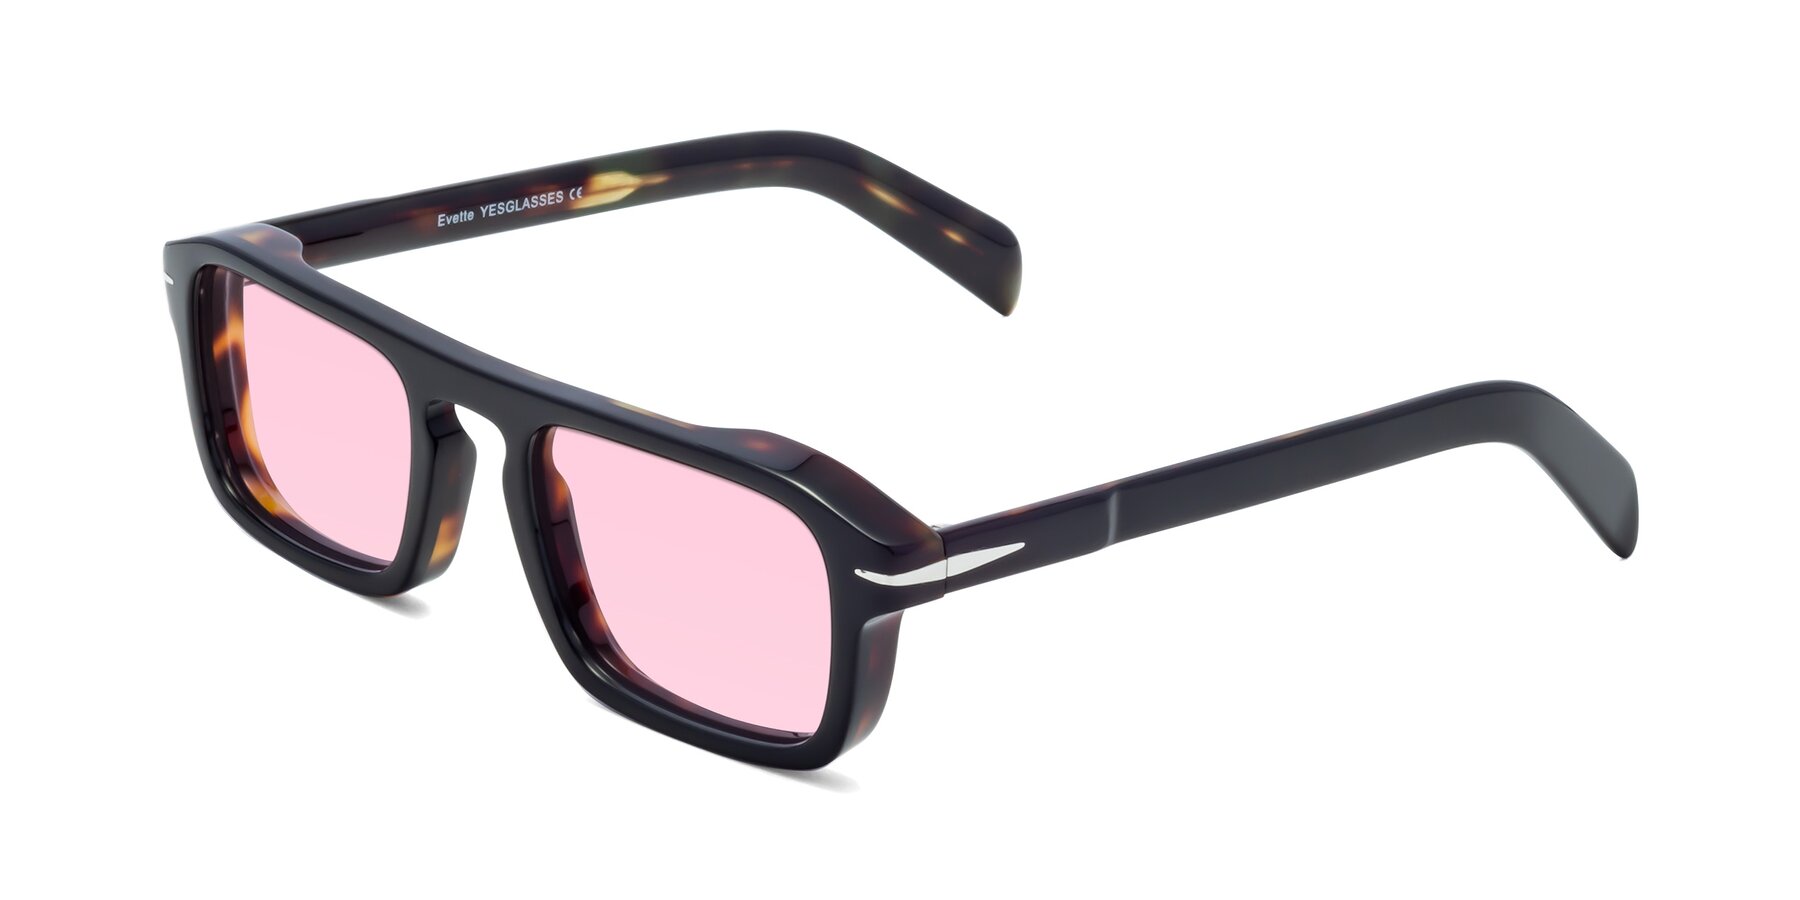 Angle of Evette in Black-Tortoise with Light Pink Tinted Lenses